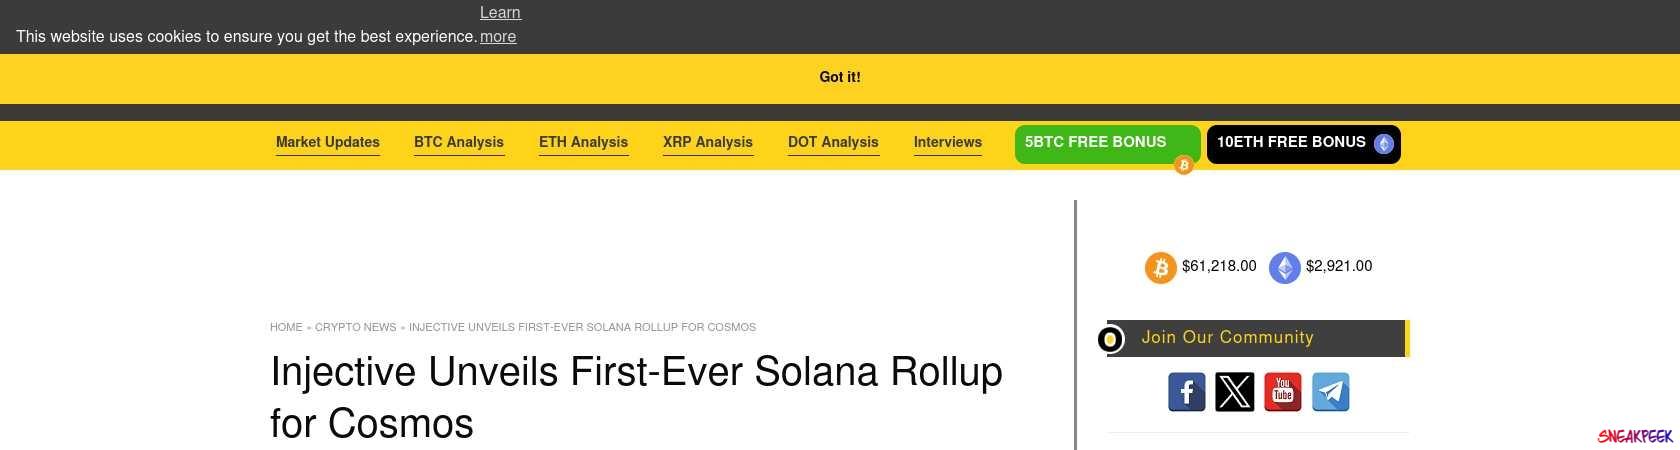 Read the full Article:  ⭲ Injective Unveils First-Ever Solana Rollup for Cosmos